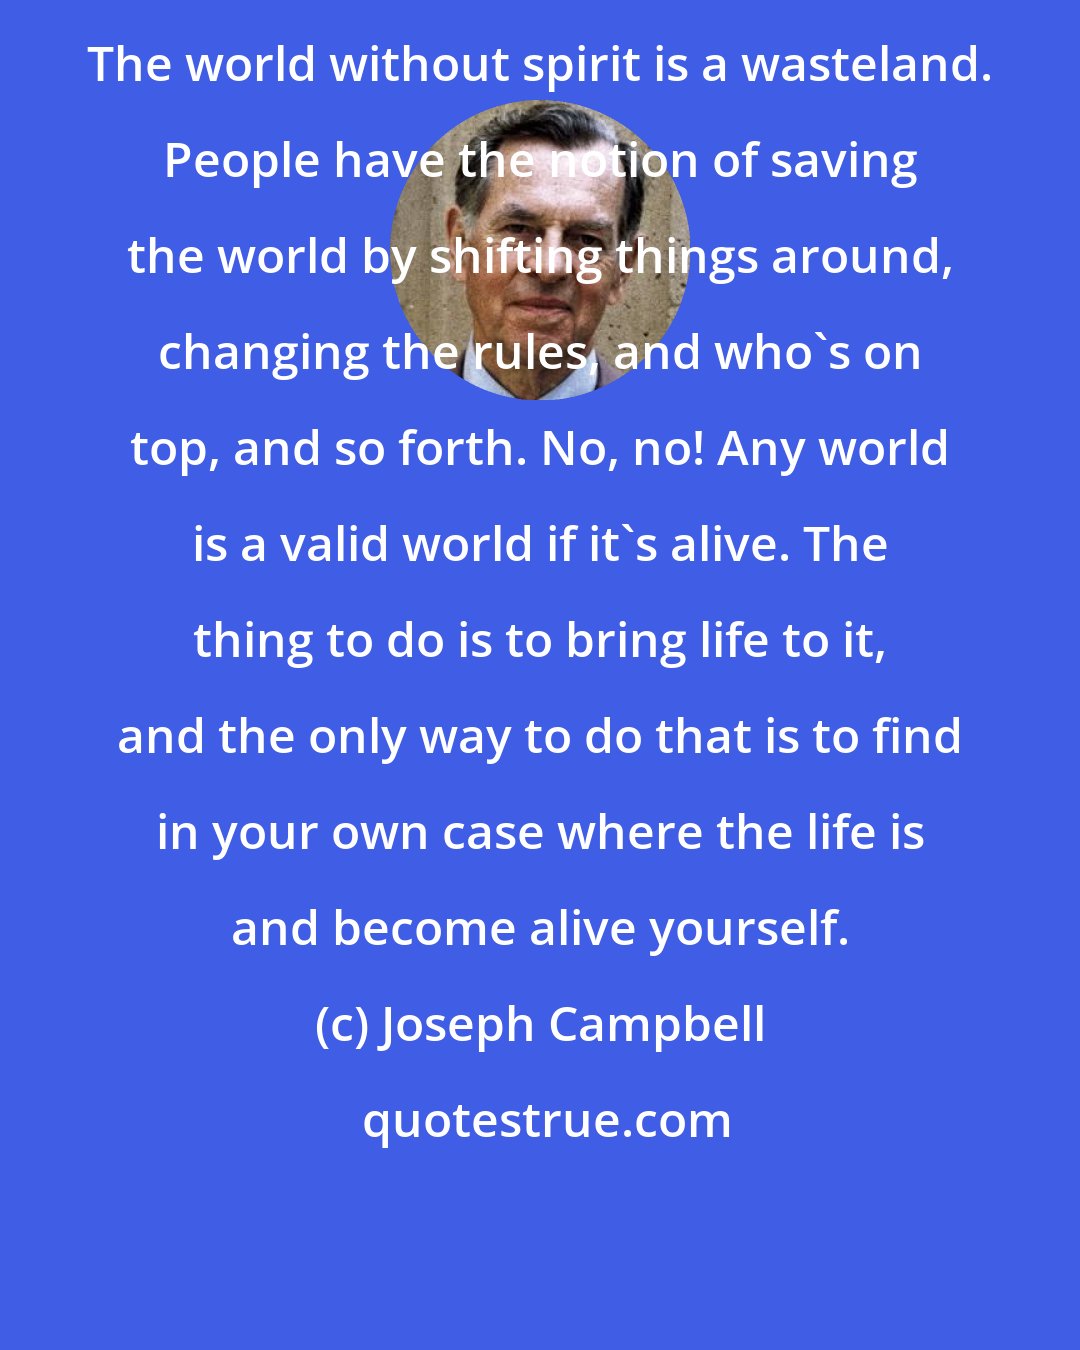 Joseph Campbell: The world without spirit is a wasteland. People have the notion of saving the world by shifting things around, changing the rules, and who's on top, and so forth. No, no! Any world is a valid world if it's alive. The thing to do is to bring life to it, and the only way to do that is to find in your own case where the life is and become alive yourself.